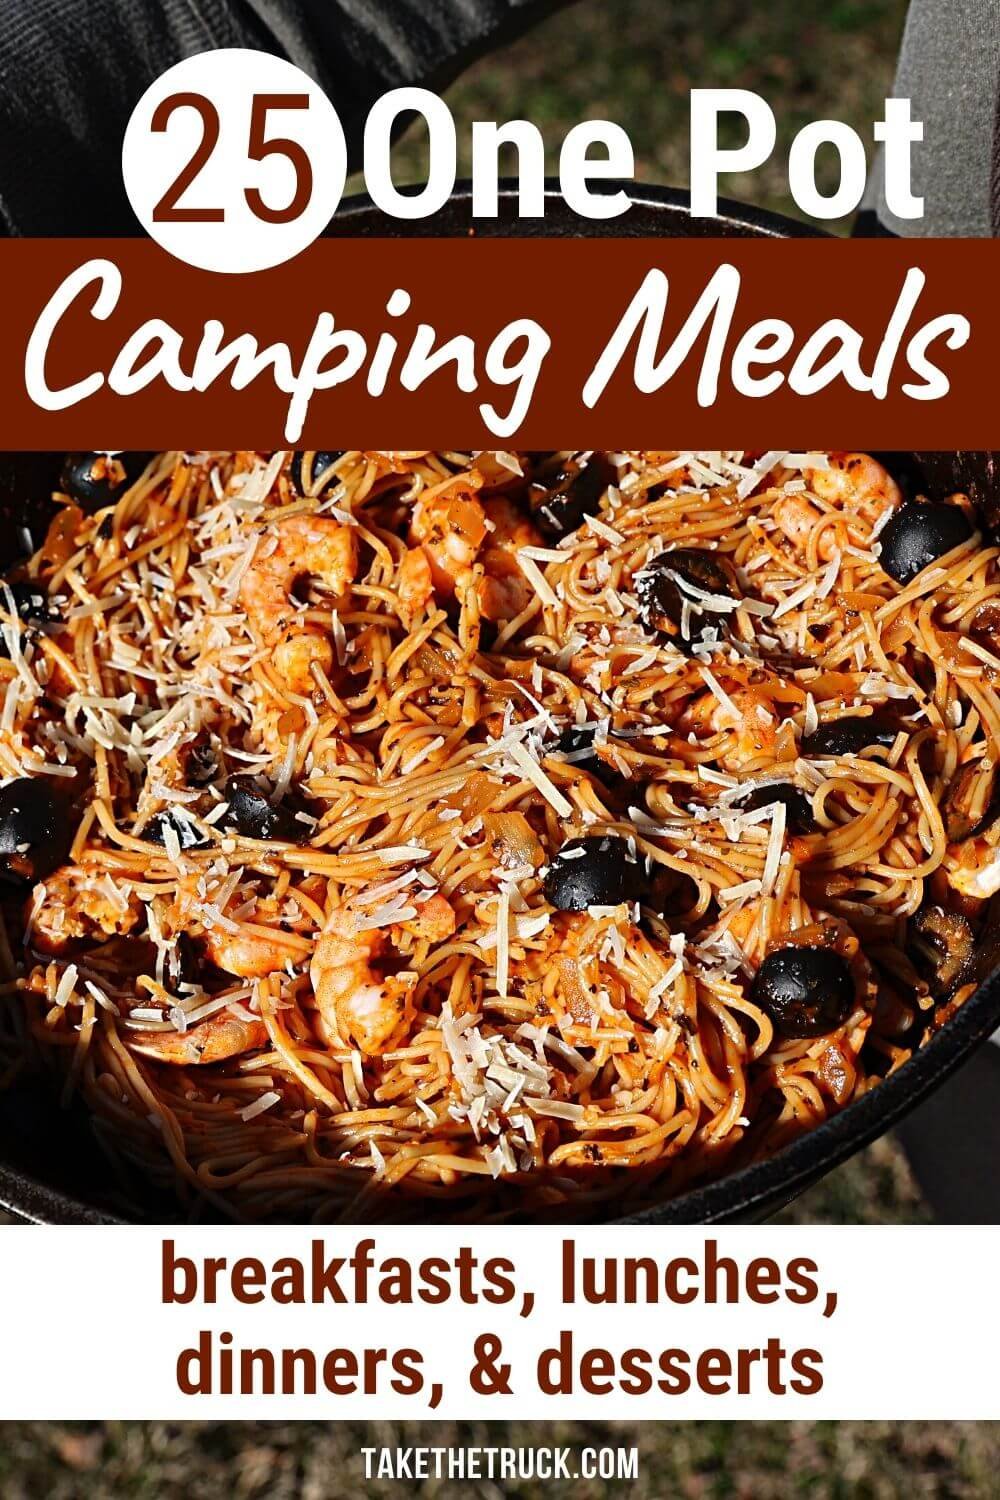 Easy one pot camping meals for families. Extra one pot camping meal dinner ideas. Camping one pot meals free printable showing all the one pot camping recipes.